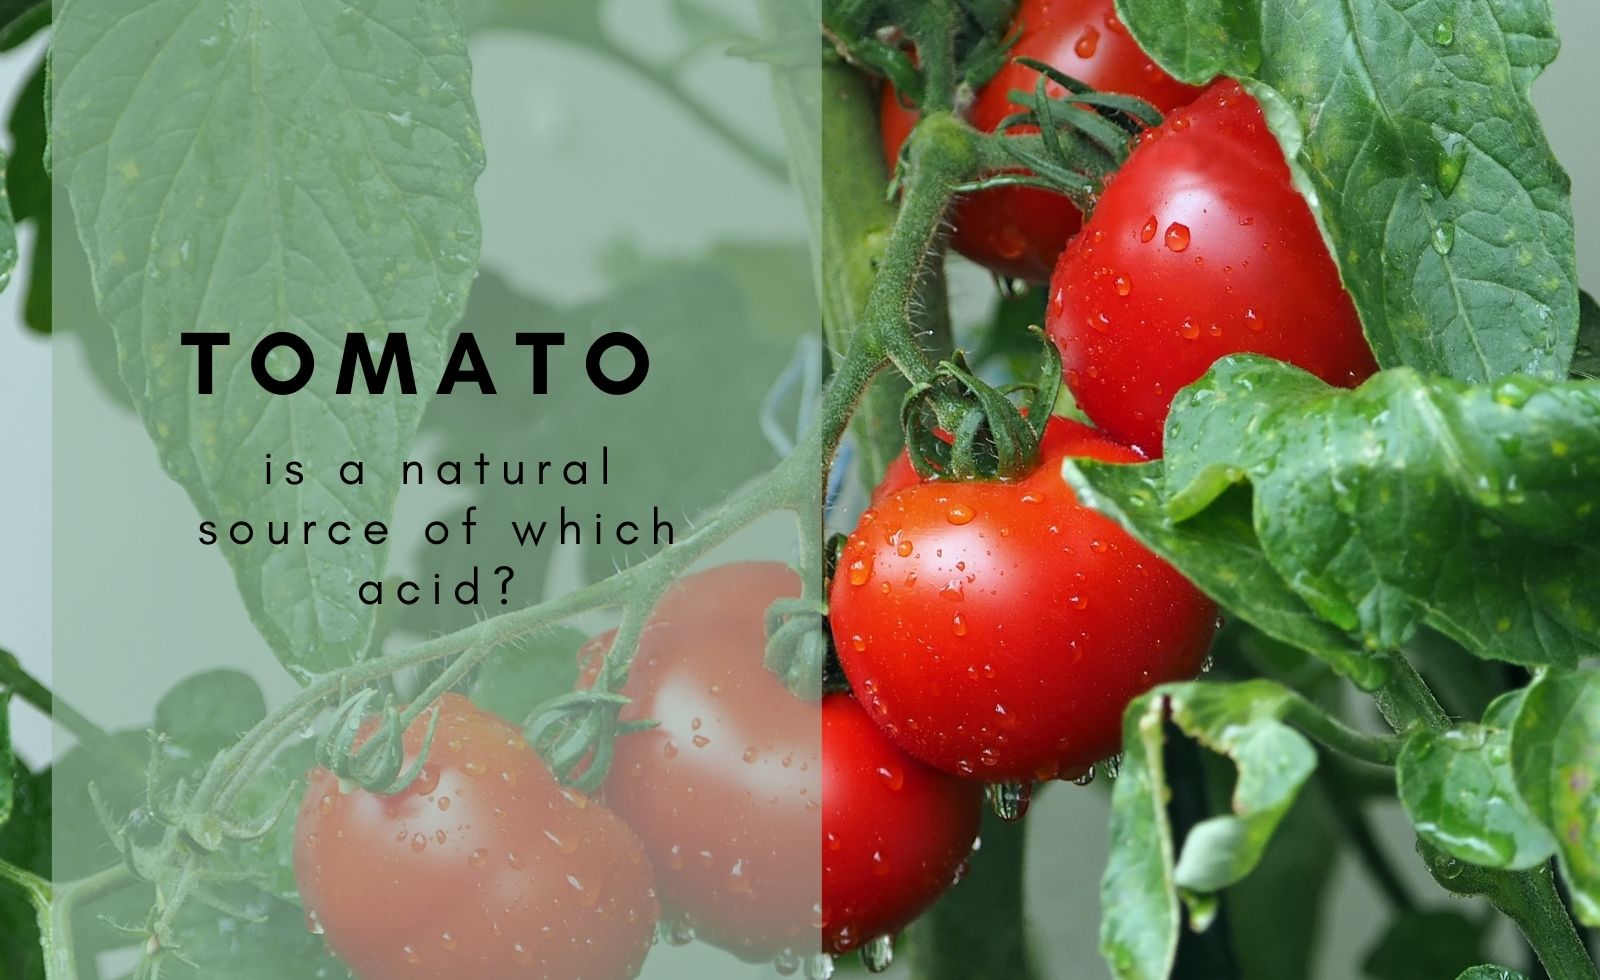 Tomato is a natural source of which acid